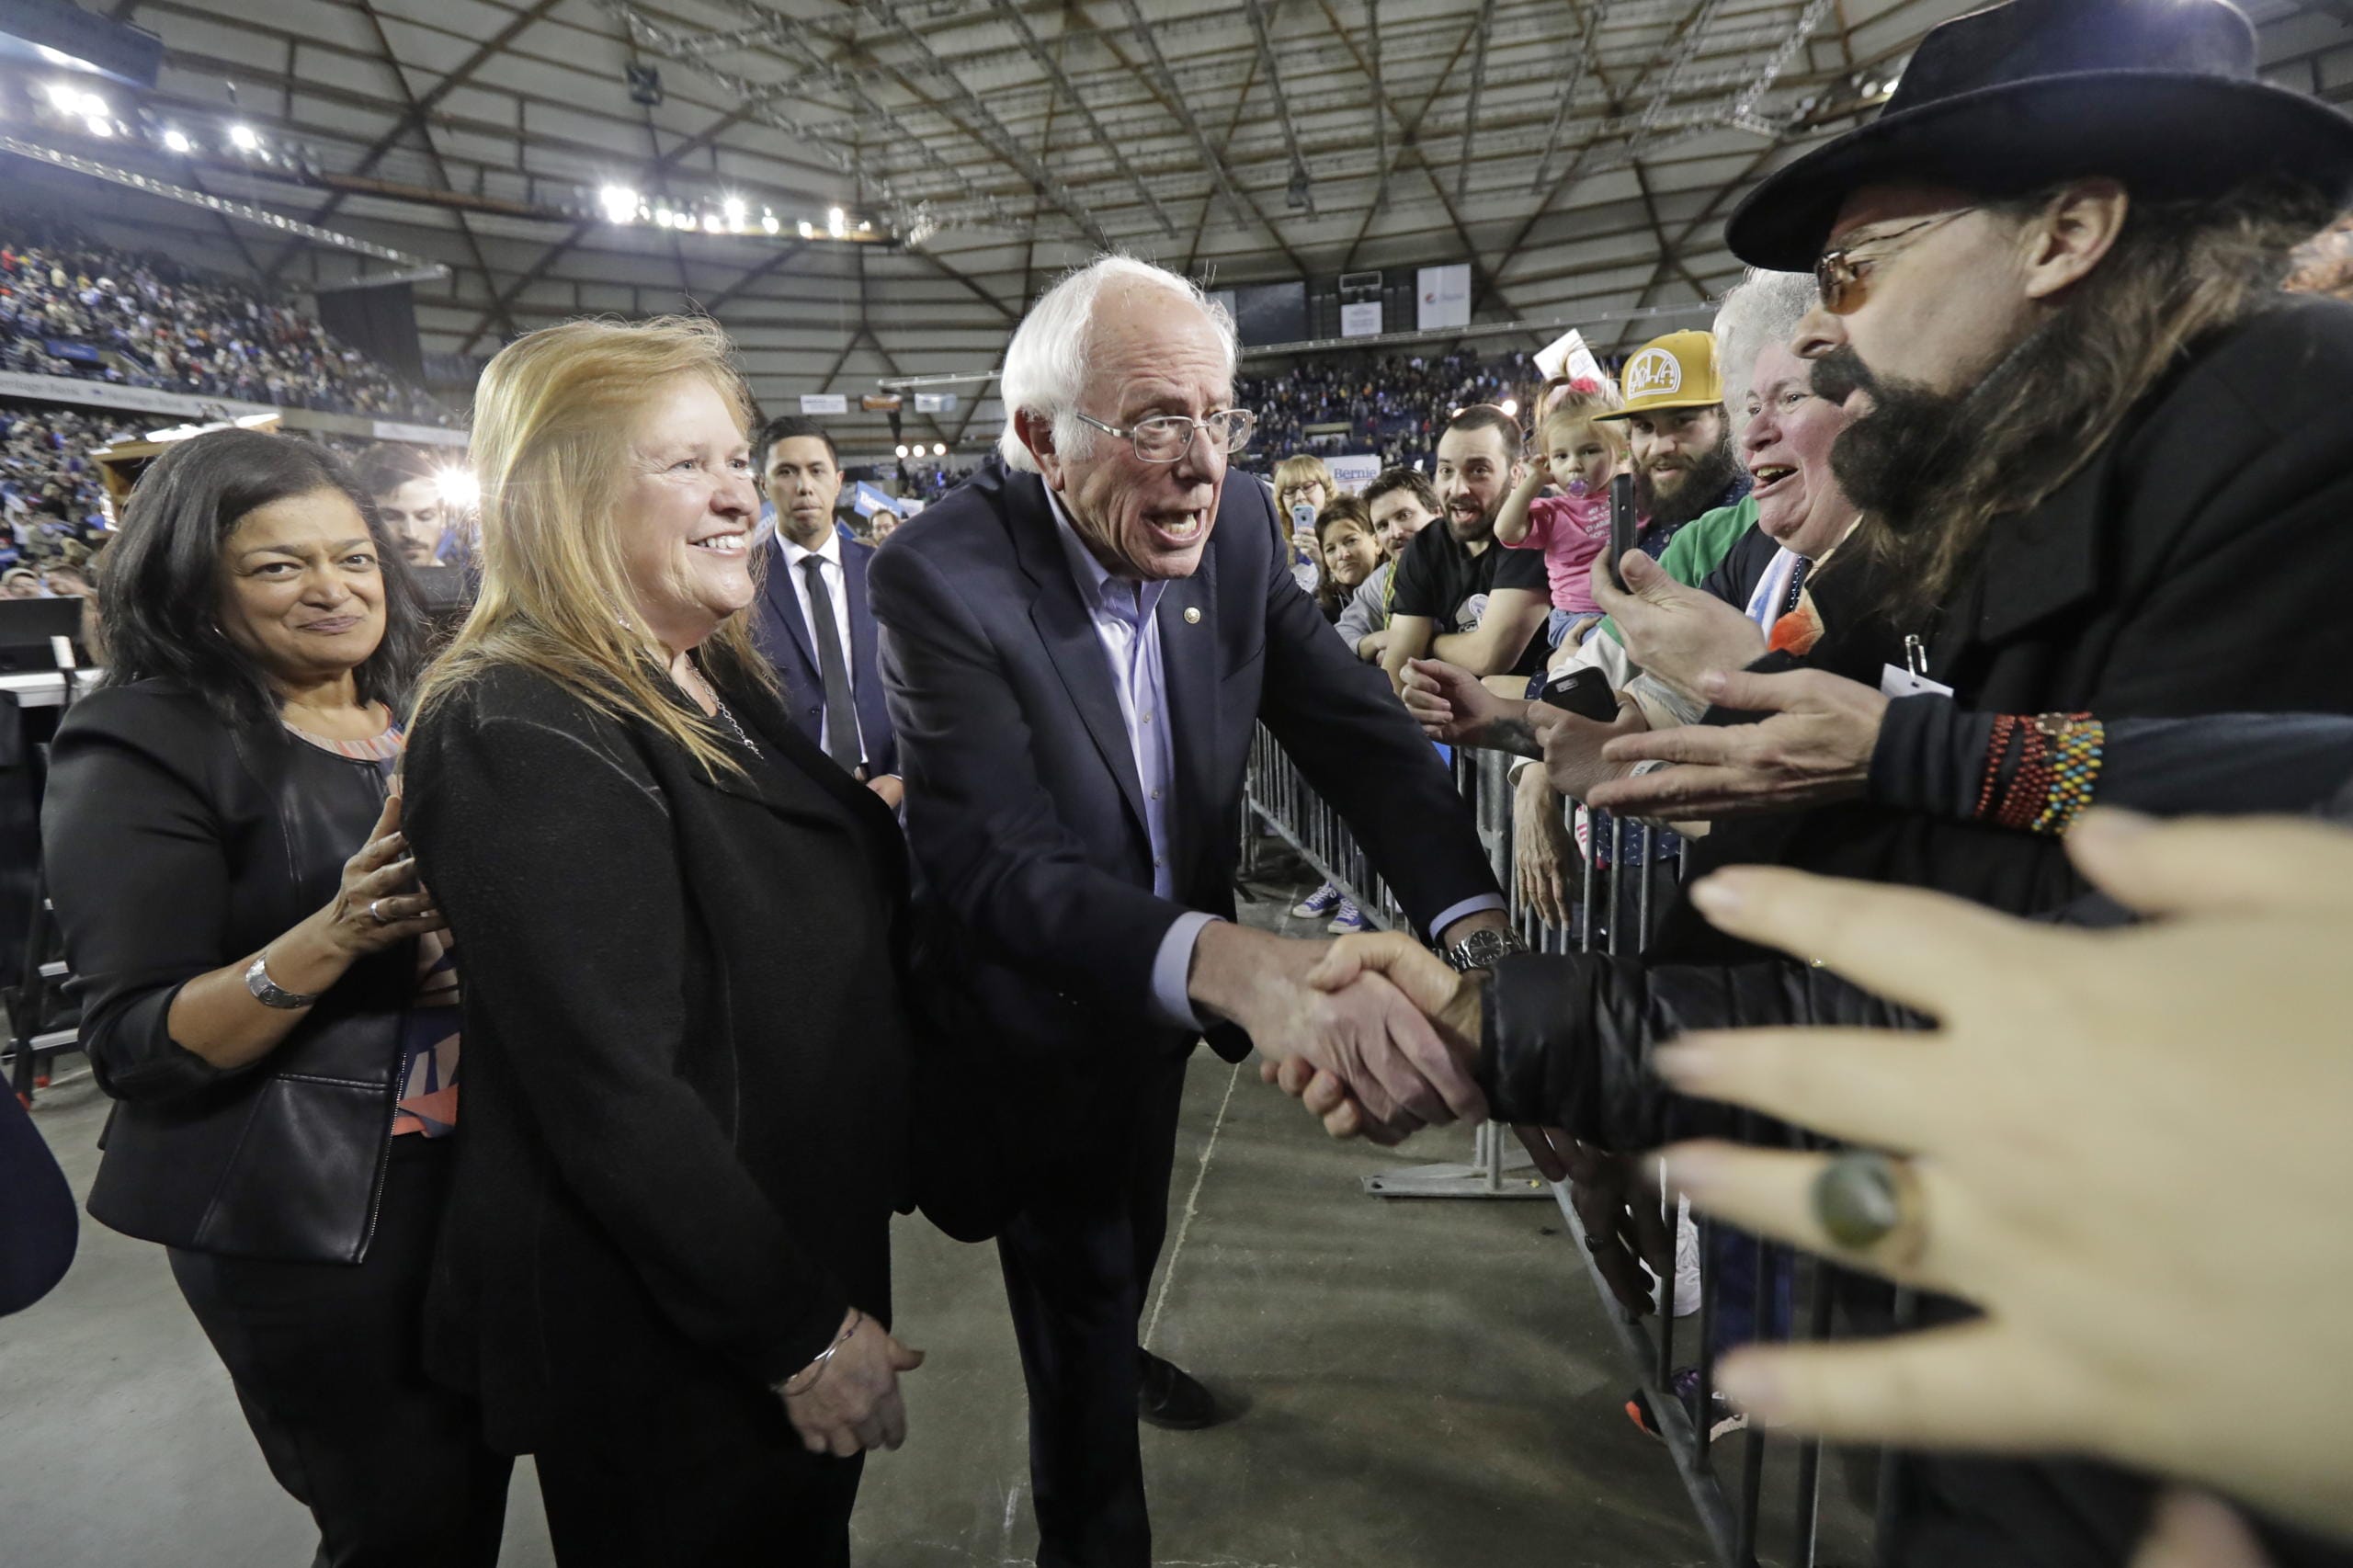 Democratic presidential candidate Sen. Bernie Sanders I-Vt., center, shakes hands along with his wife Jane, second from left, and U.S. Rep. Pramila Jayapal (D-Wash.), left, after his speech at a campaign event in Tacoma, Wash., Monday, Feb. 17, 2020. (AP Photo/Ted S.